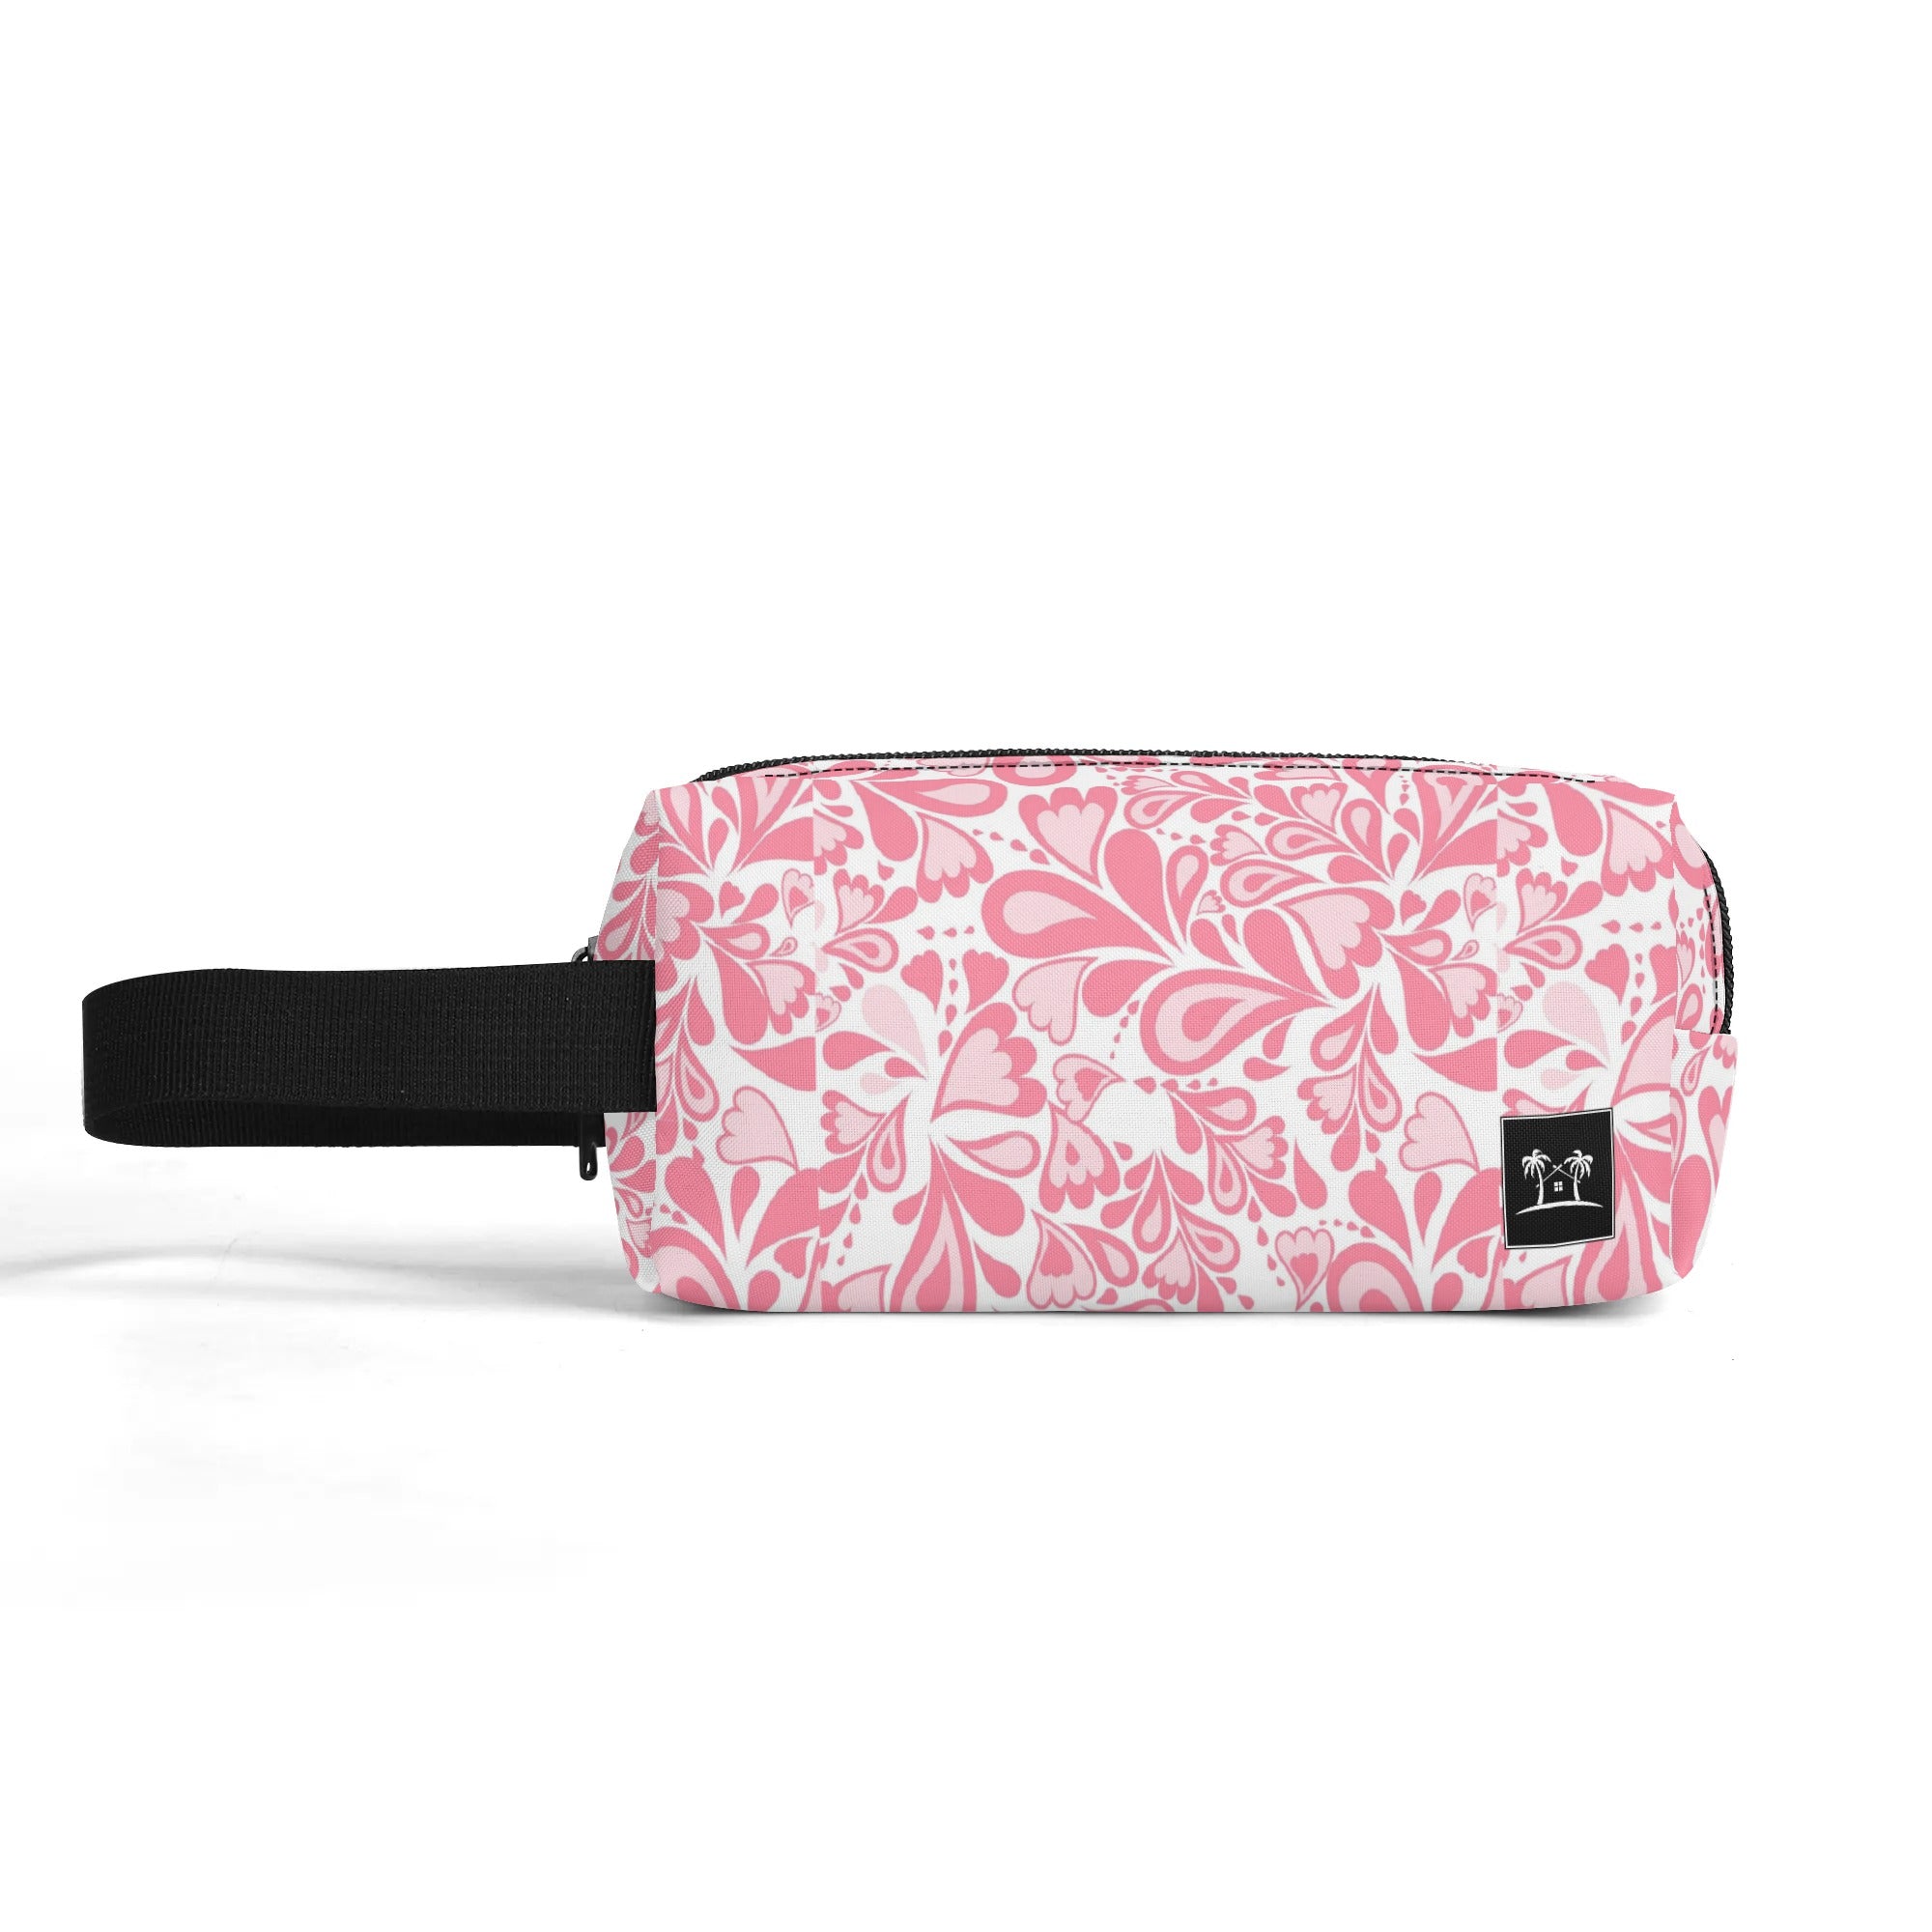 Printed Polyester Wristlet Purse - Paisley Hearts